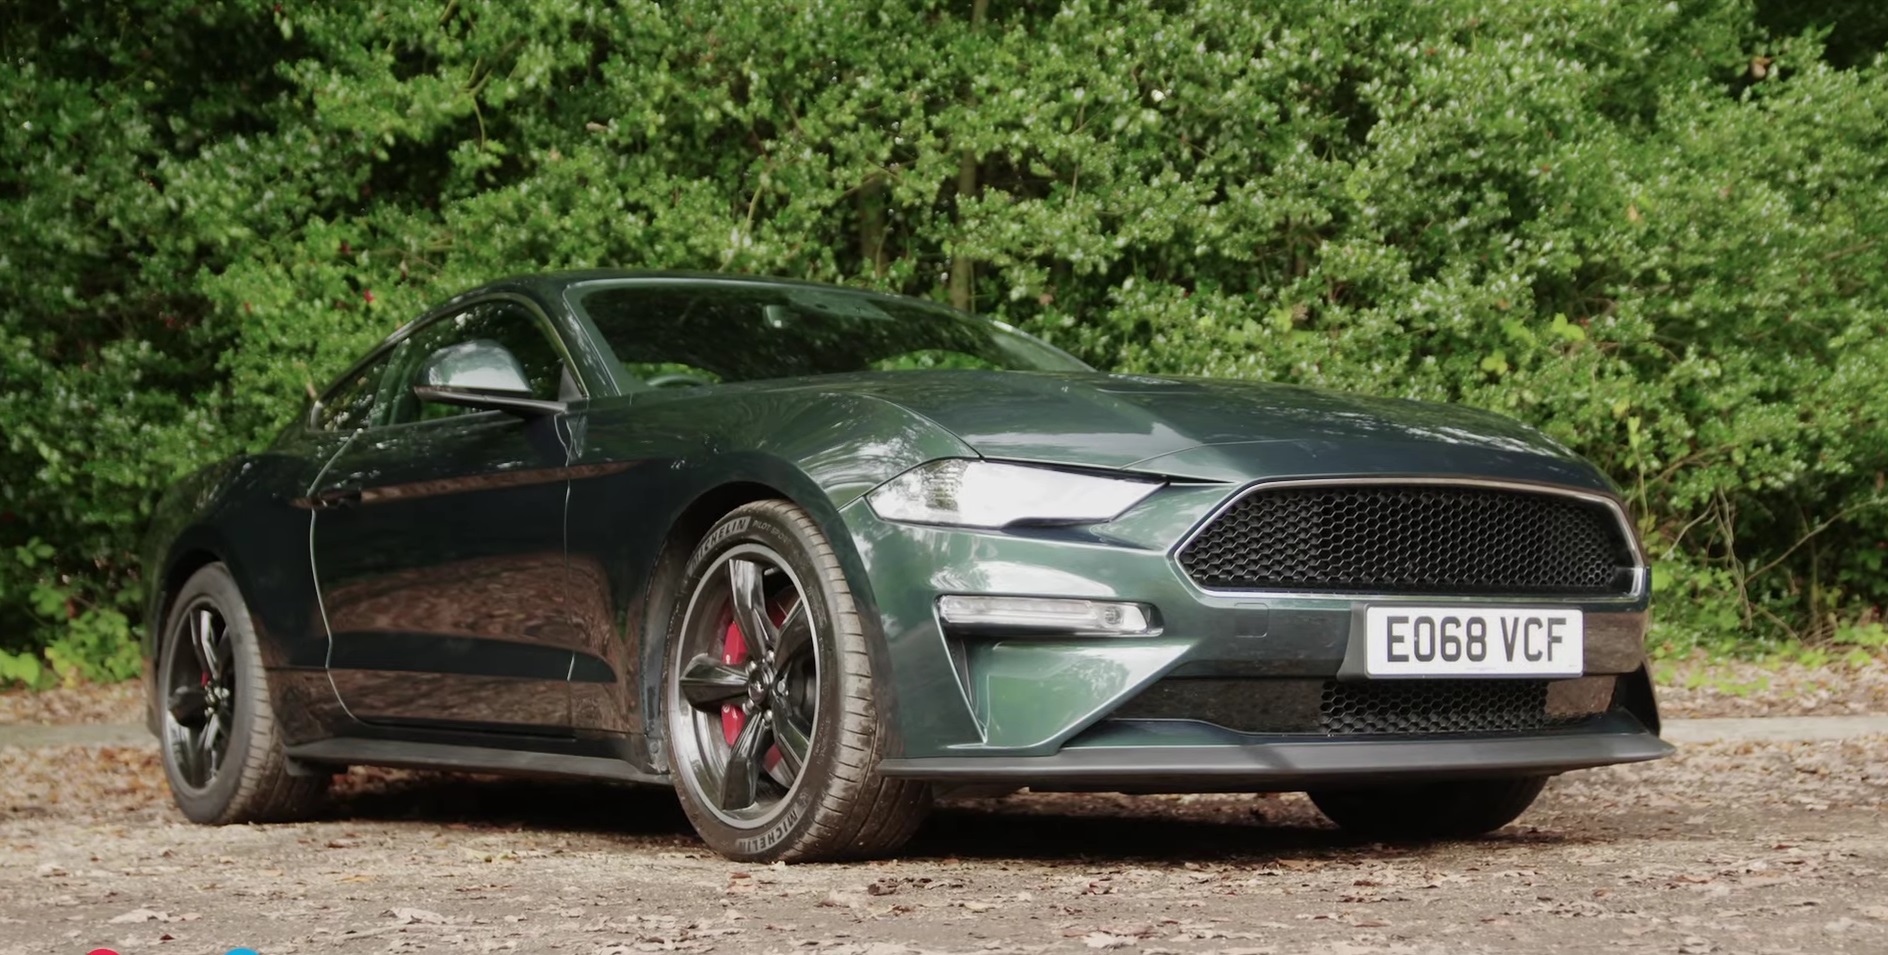 Video: 2019 Ford Mustang Bullitt - As Special As It Should Be